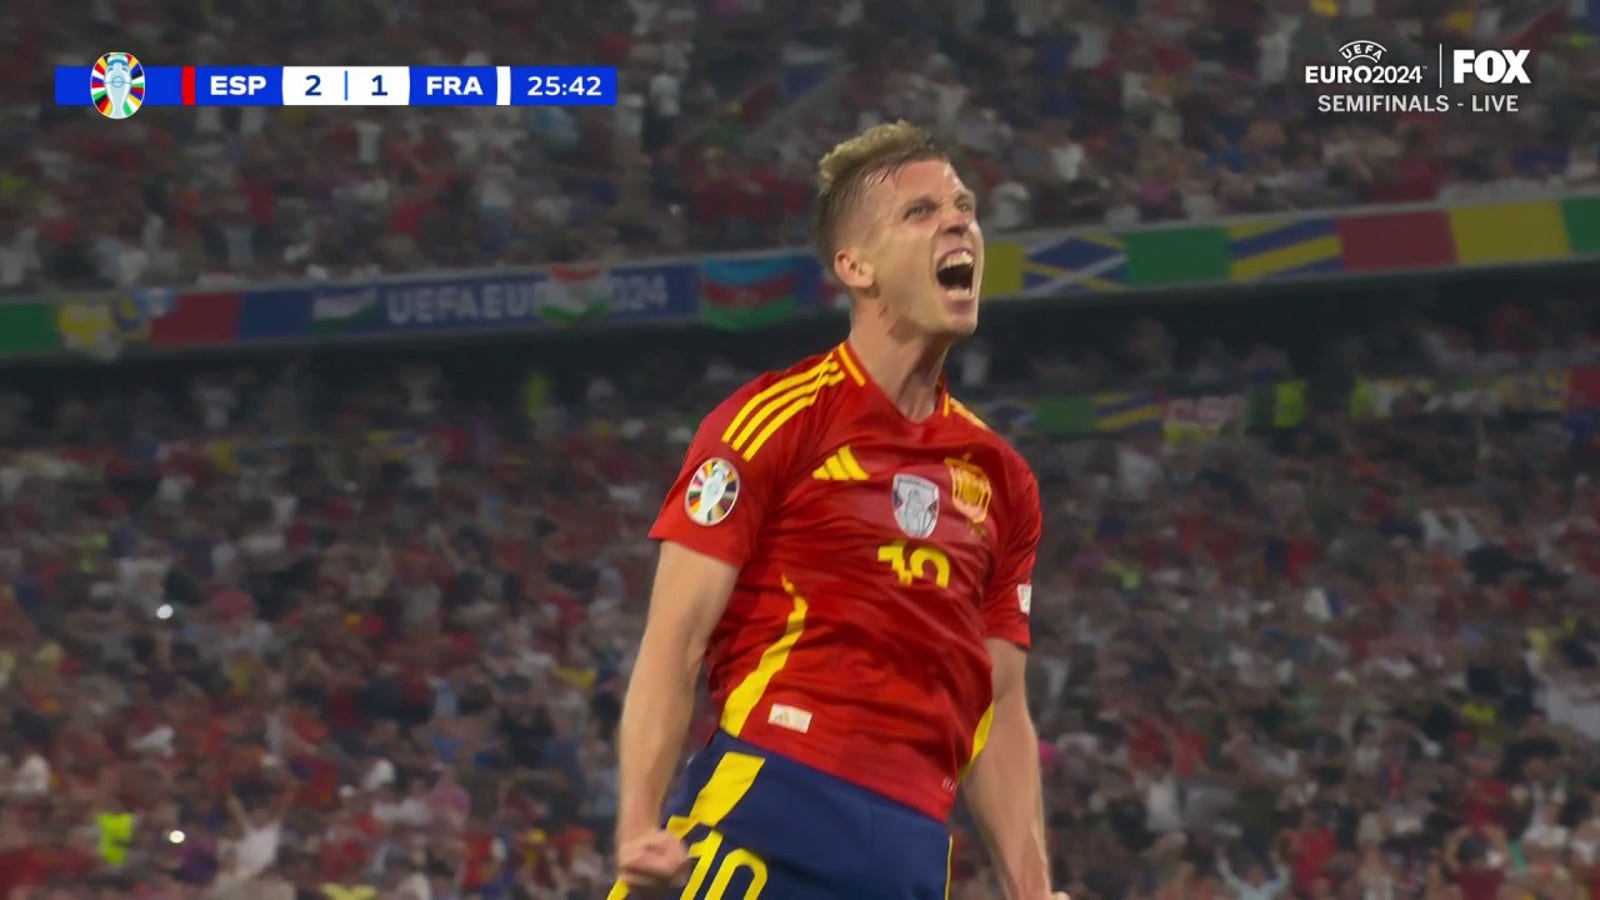 Spain takes a 2-1 lead over France after an own goal in 25' | UEFA Euro 2024